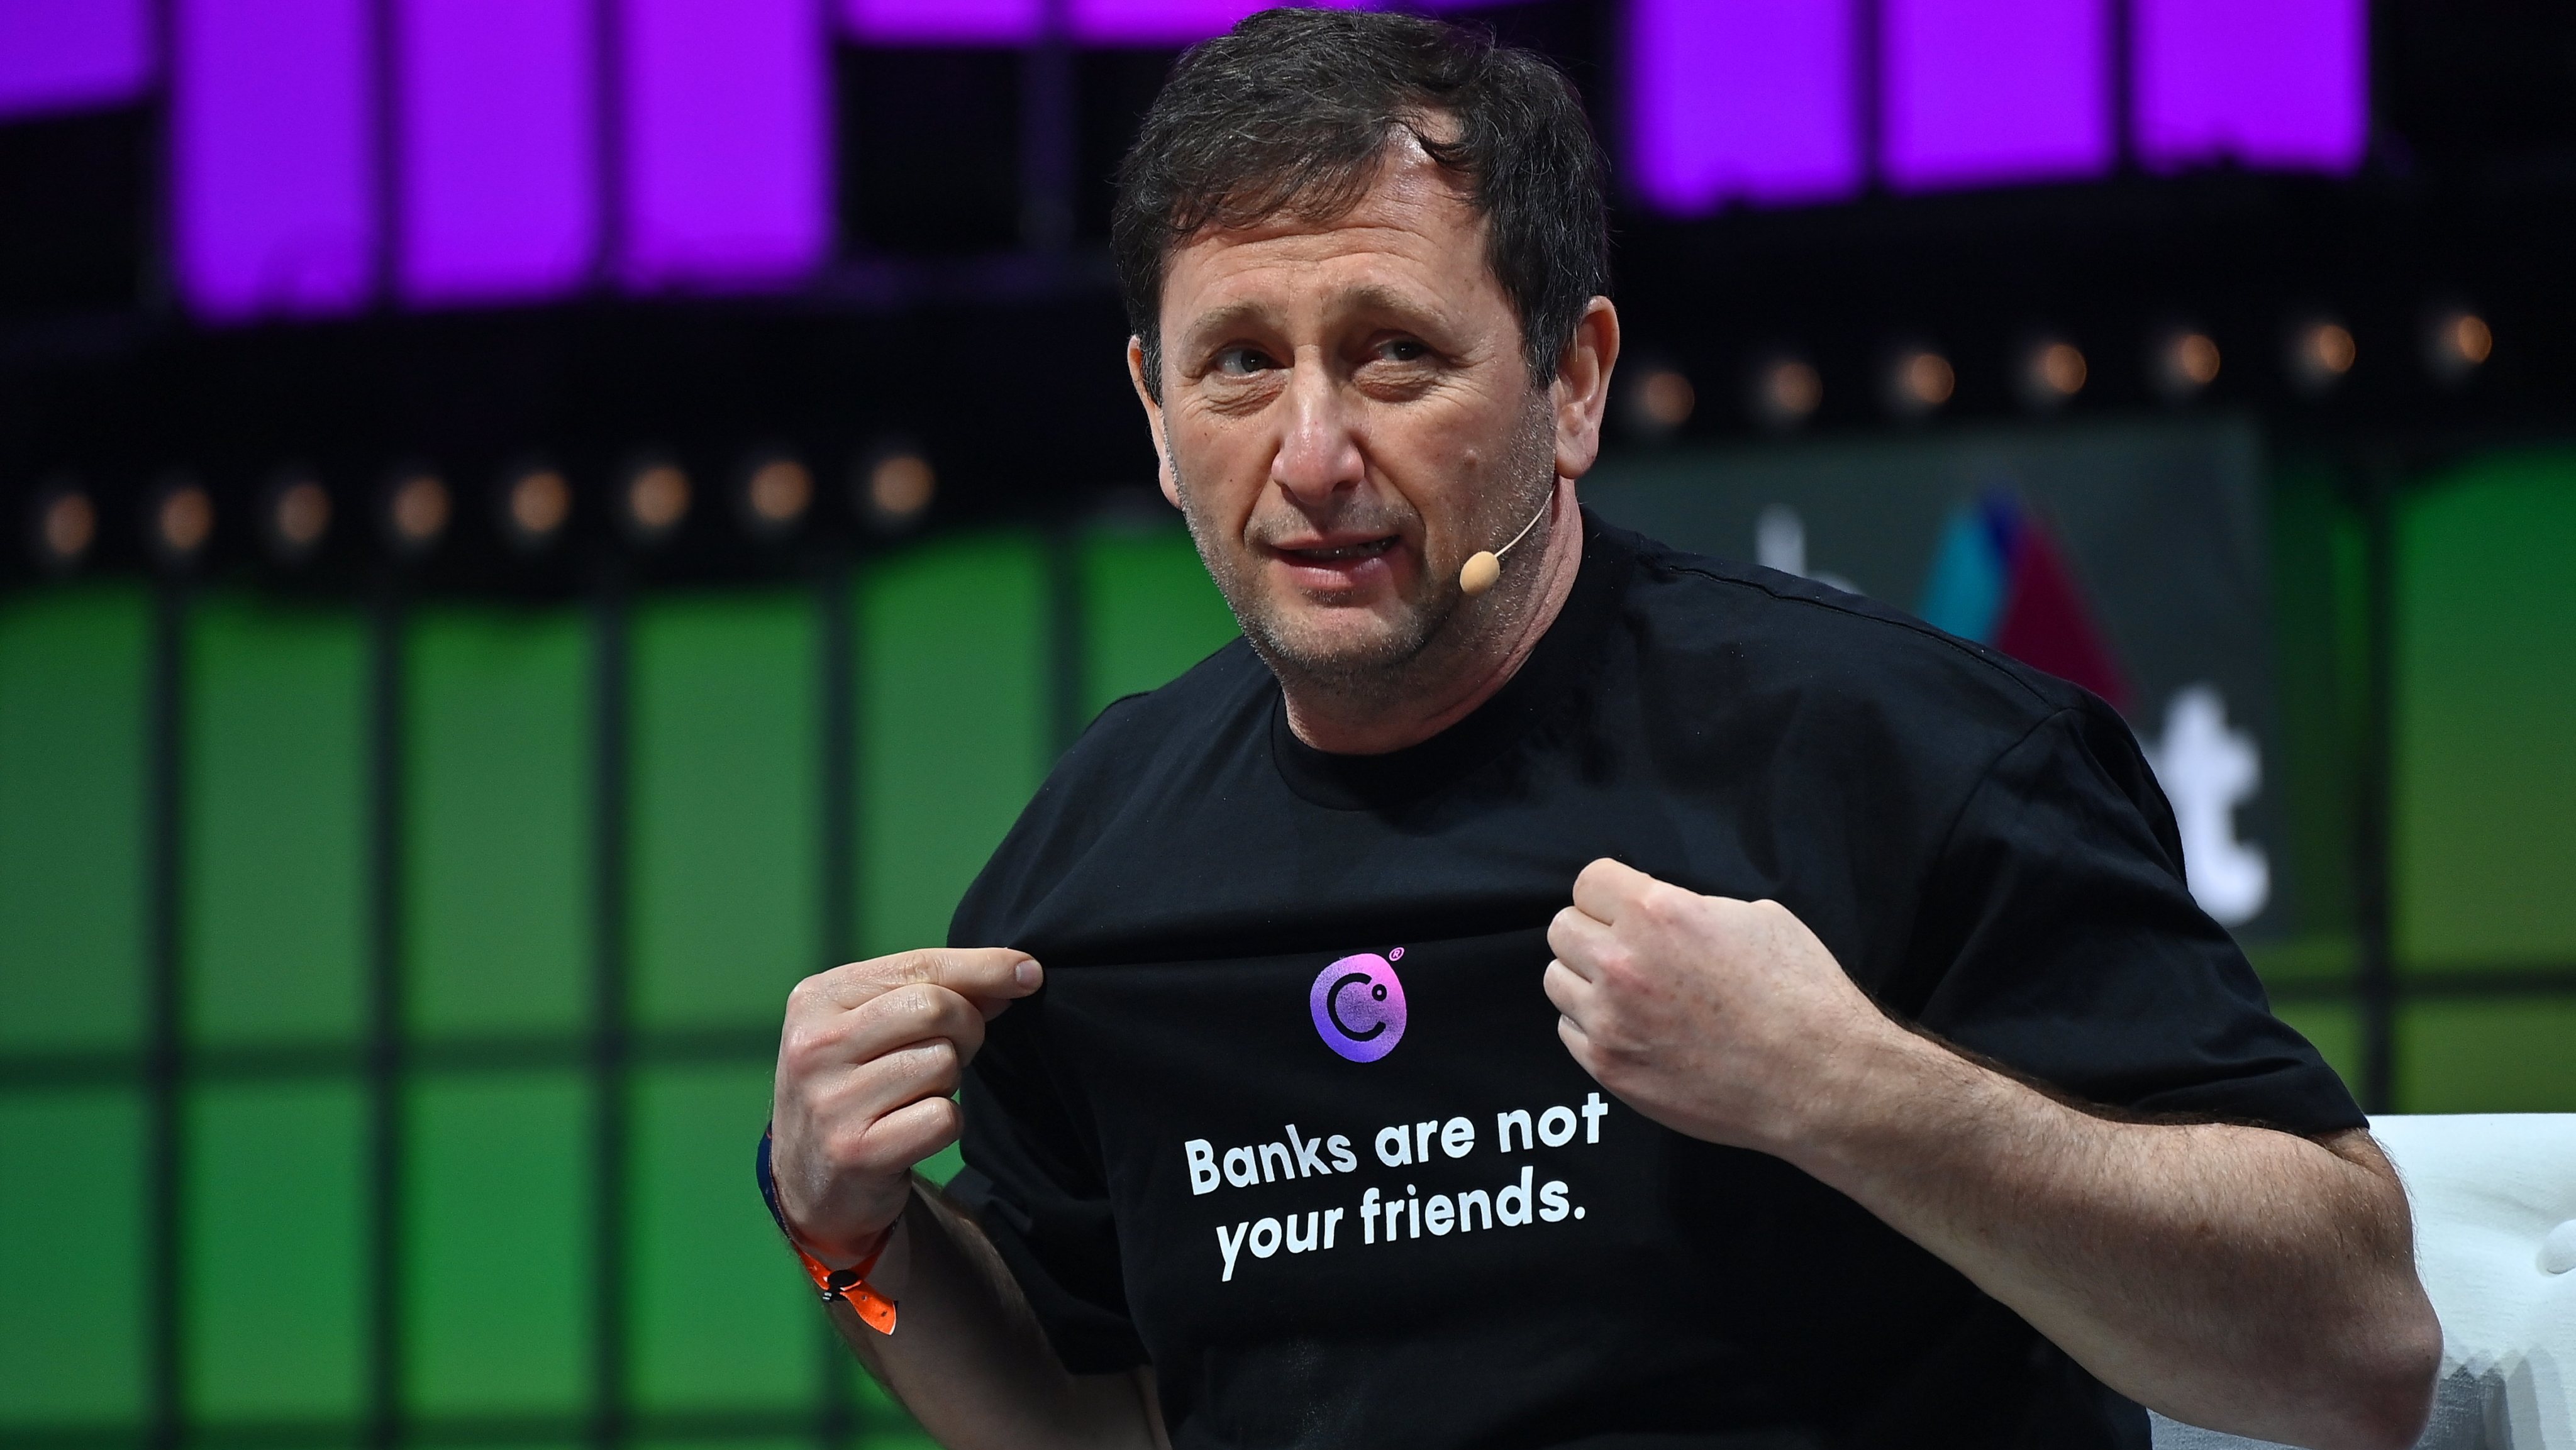 Alex Mashinsky, Celcius, on Centre Stage during day three of Web Summit 2021 at the Altice Arena in Lisbon,